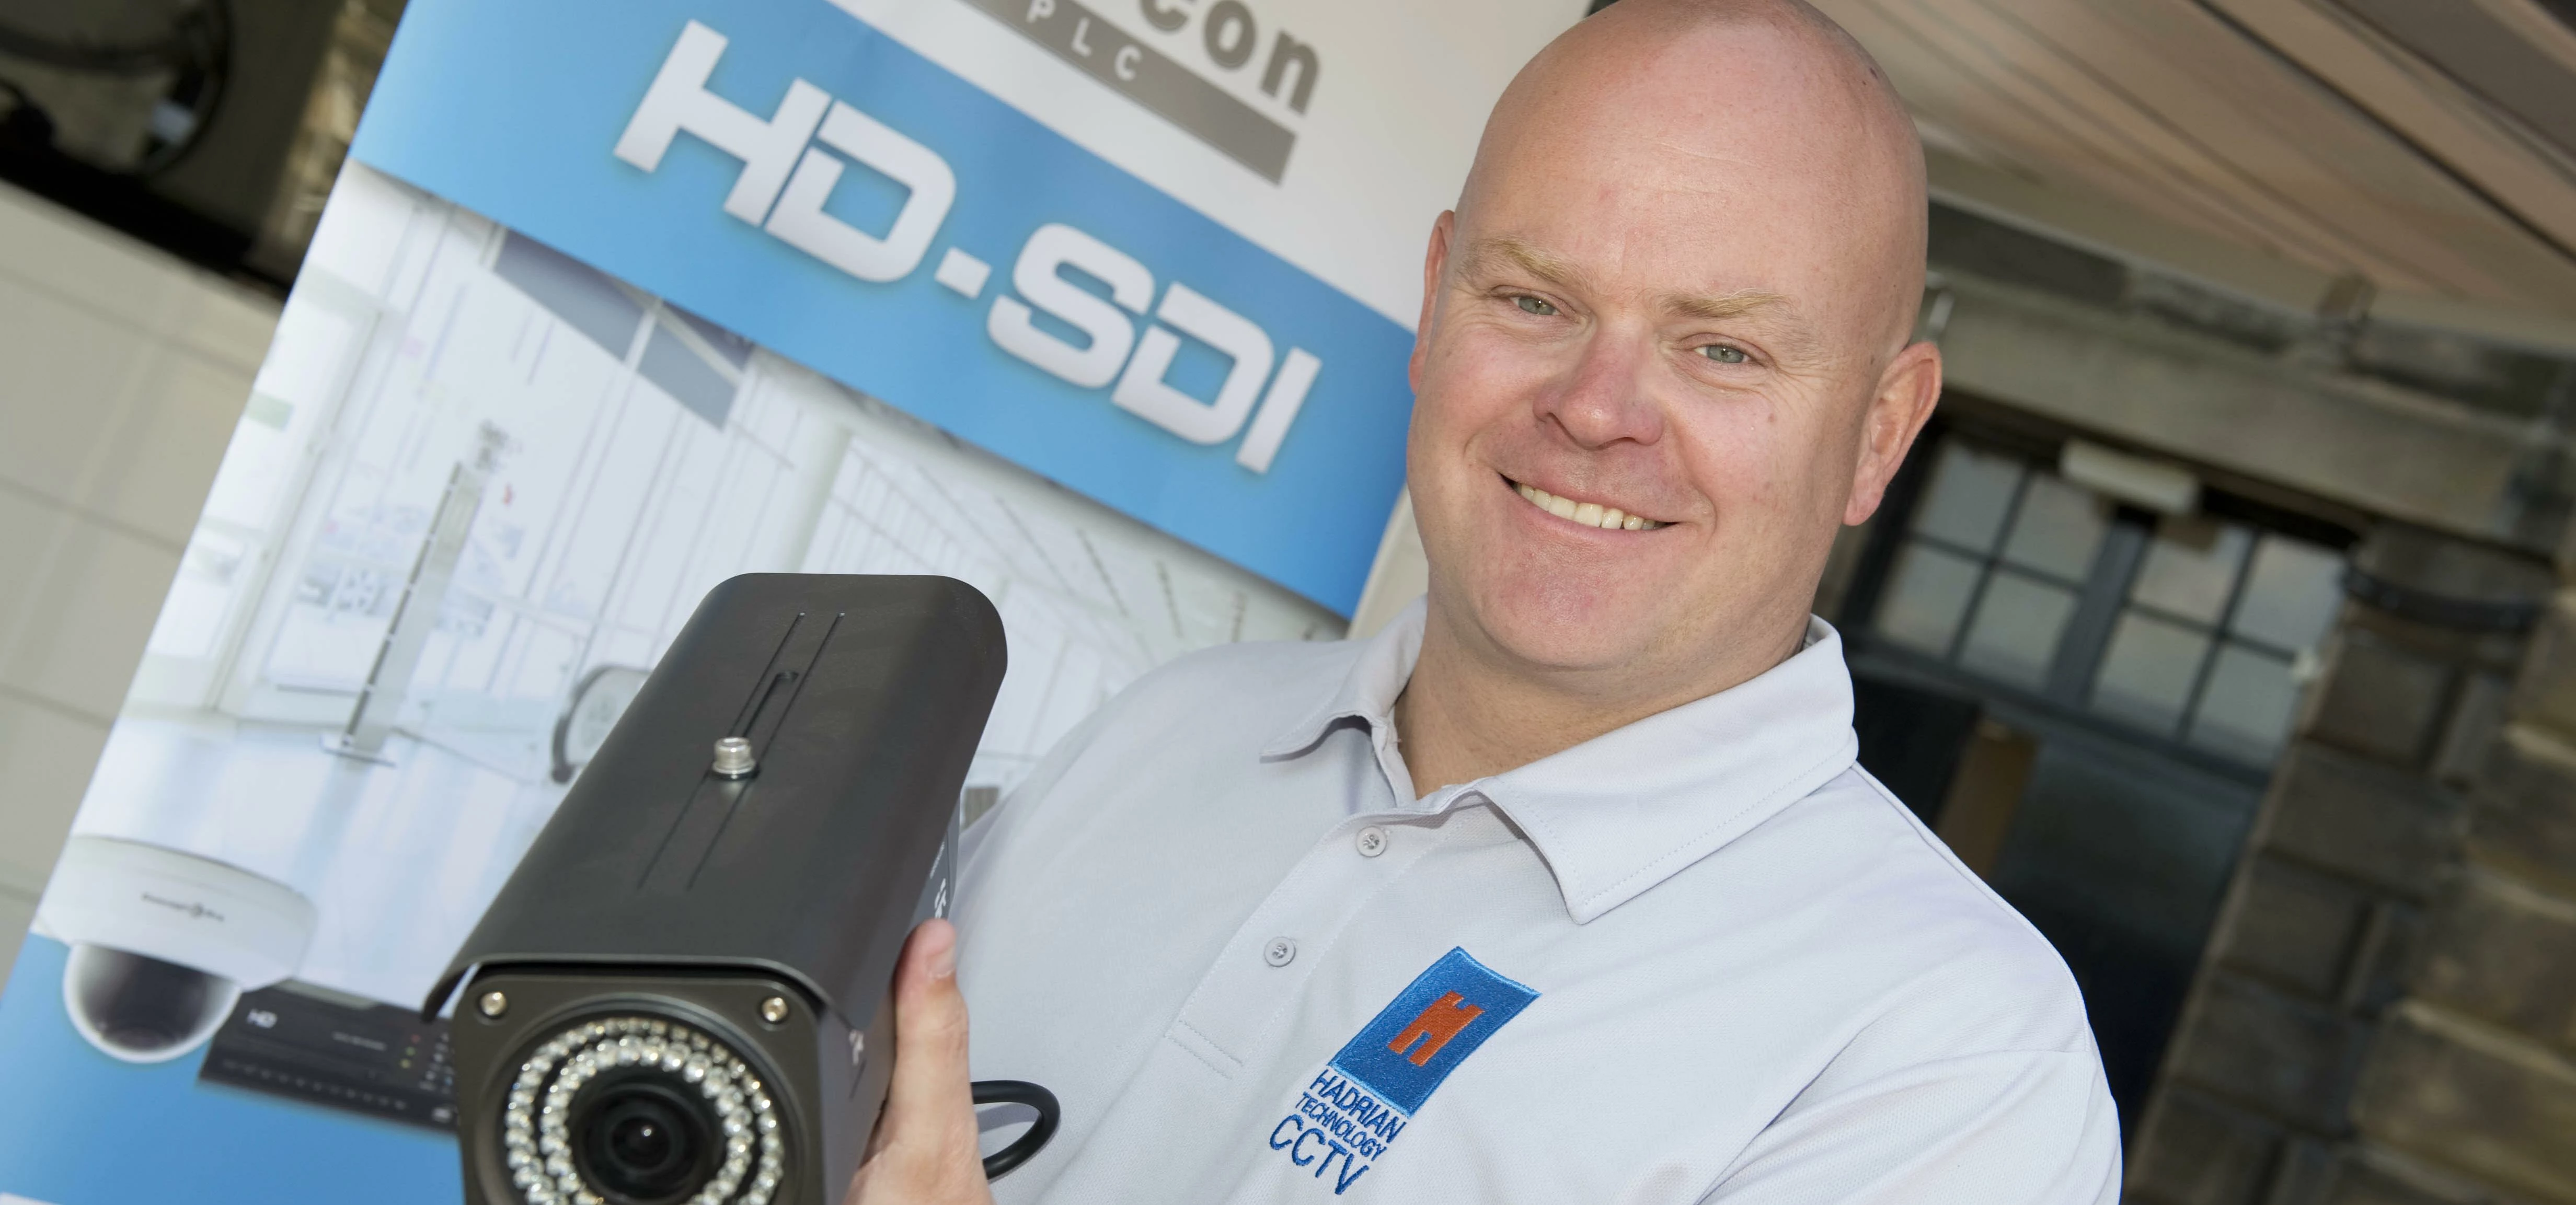 Hadrian Technology general manager, Garry Trotter